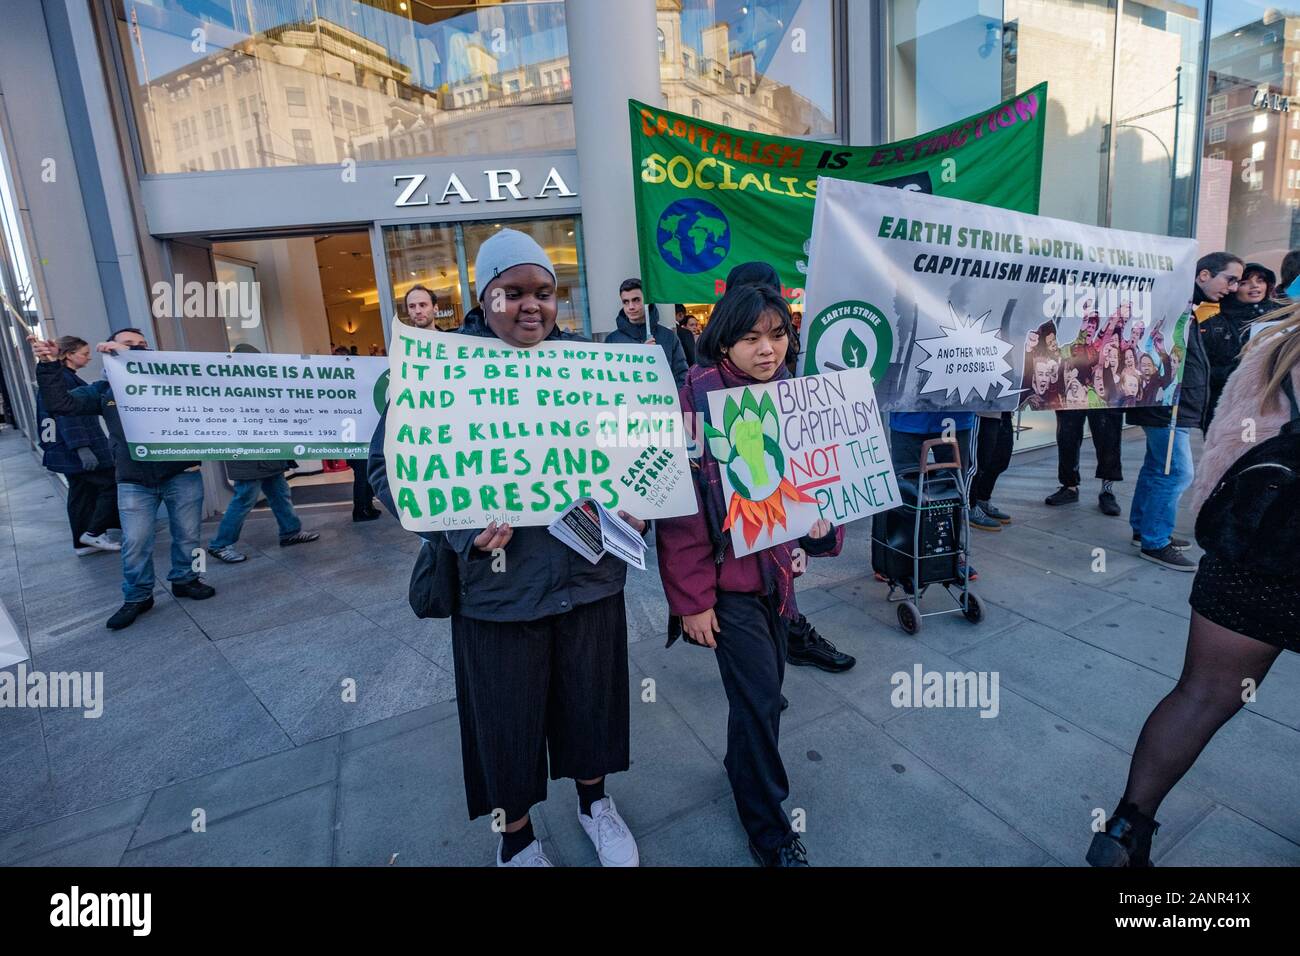 London, UK. 18th January 2019. Earth Strike protest outside fashion store  Zara on Oxford Street because of its involvement in the plunder of the  planet, people and resources. The fashion industry is